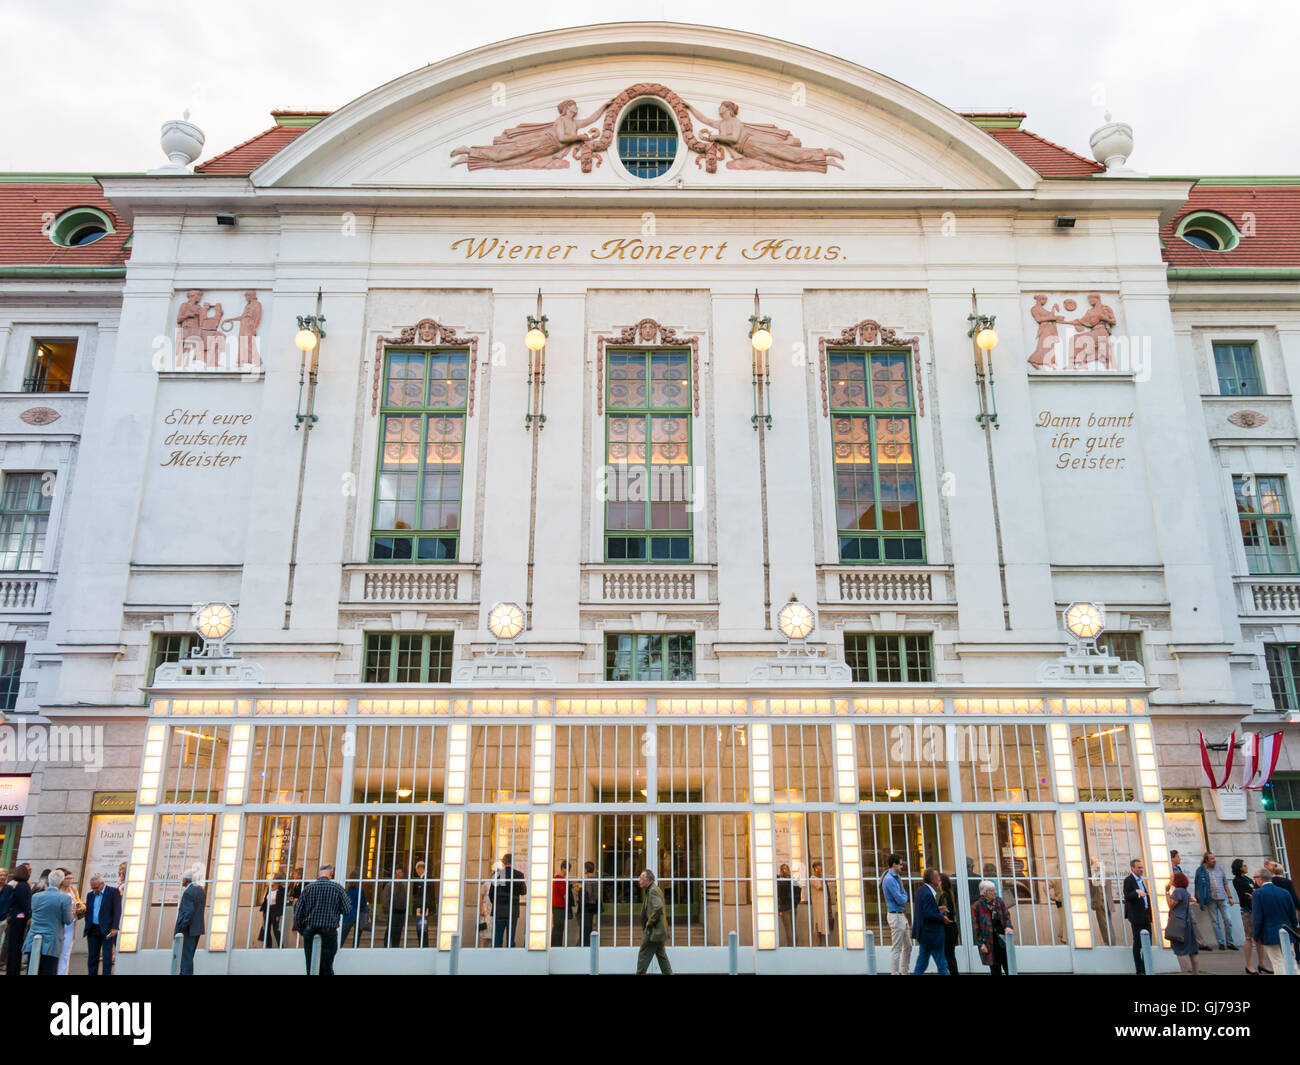 People in front of Wiener Konzerthaus, concert hall in city centre of Vienna, Austria Stock Photo